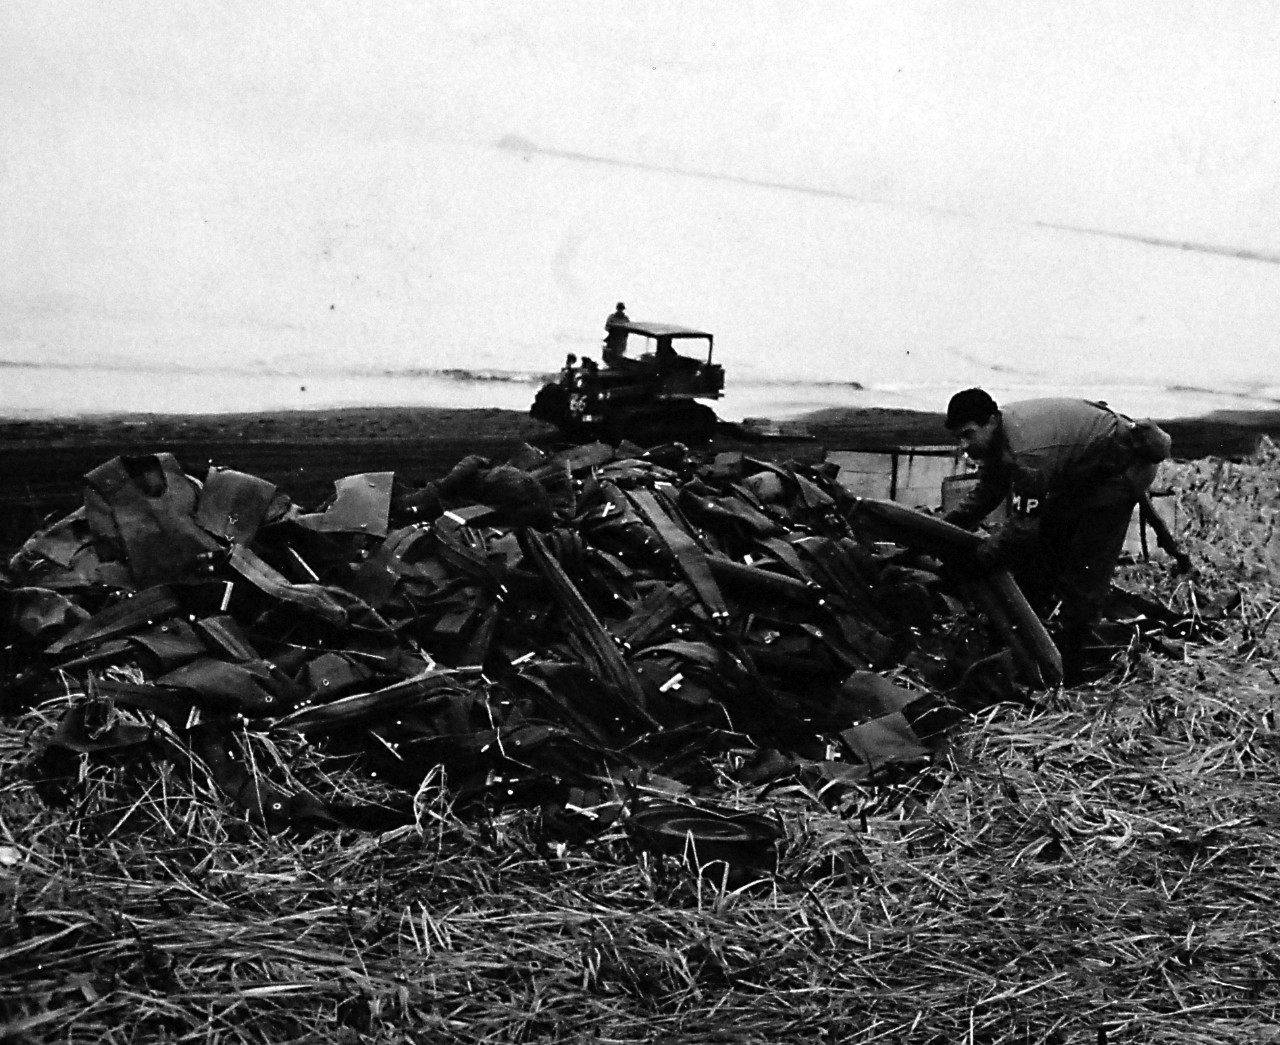 80-G-50817:    Aleutian Islands Campaign, June 1942 - August 1943.  Battle for Attu, May 1943.   Life jackets and belts piled on a beach.   Solders on landing at Attu, Aleutian Islands, piled up their life jackets and life belts which were later inflated and used as mattresses, May 12, 1943.  U.S. Navy Photograph, now in the collections of the National Archives.  (2016/05/10).